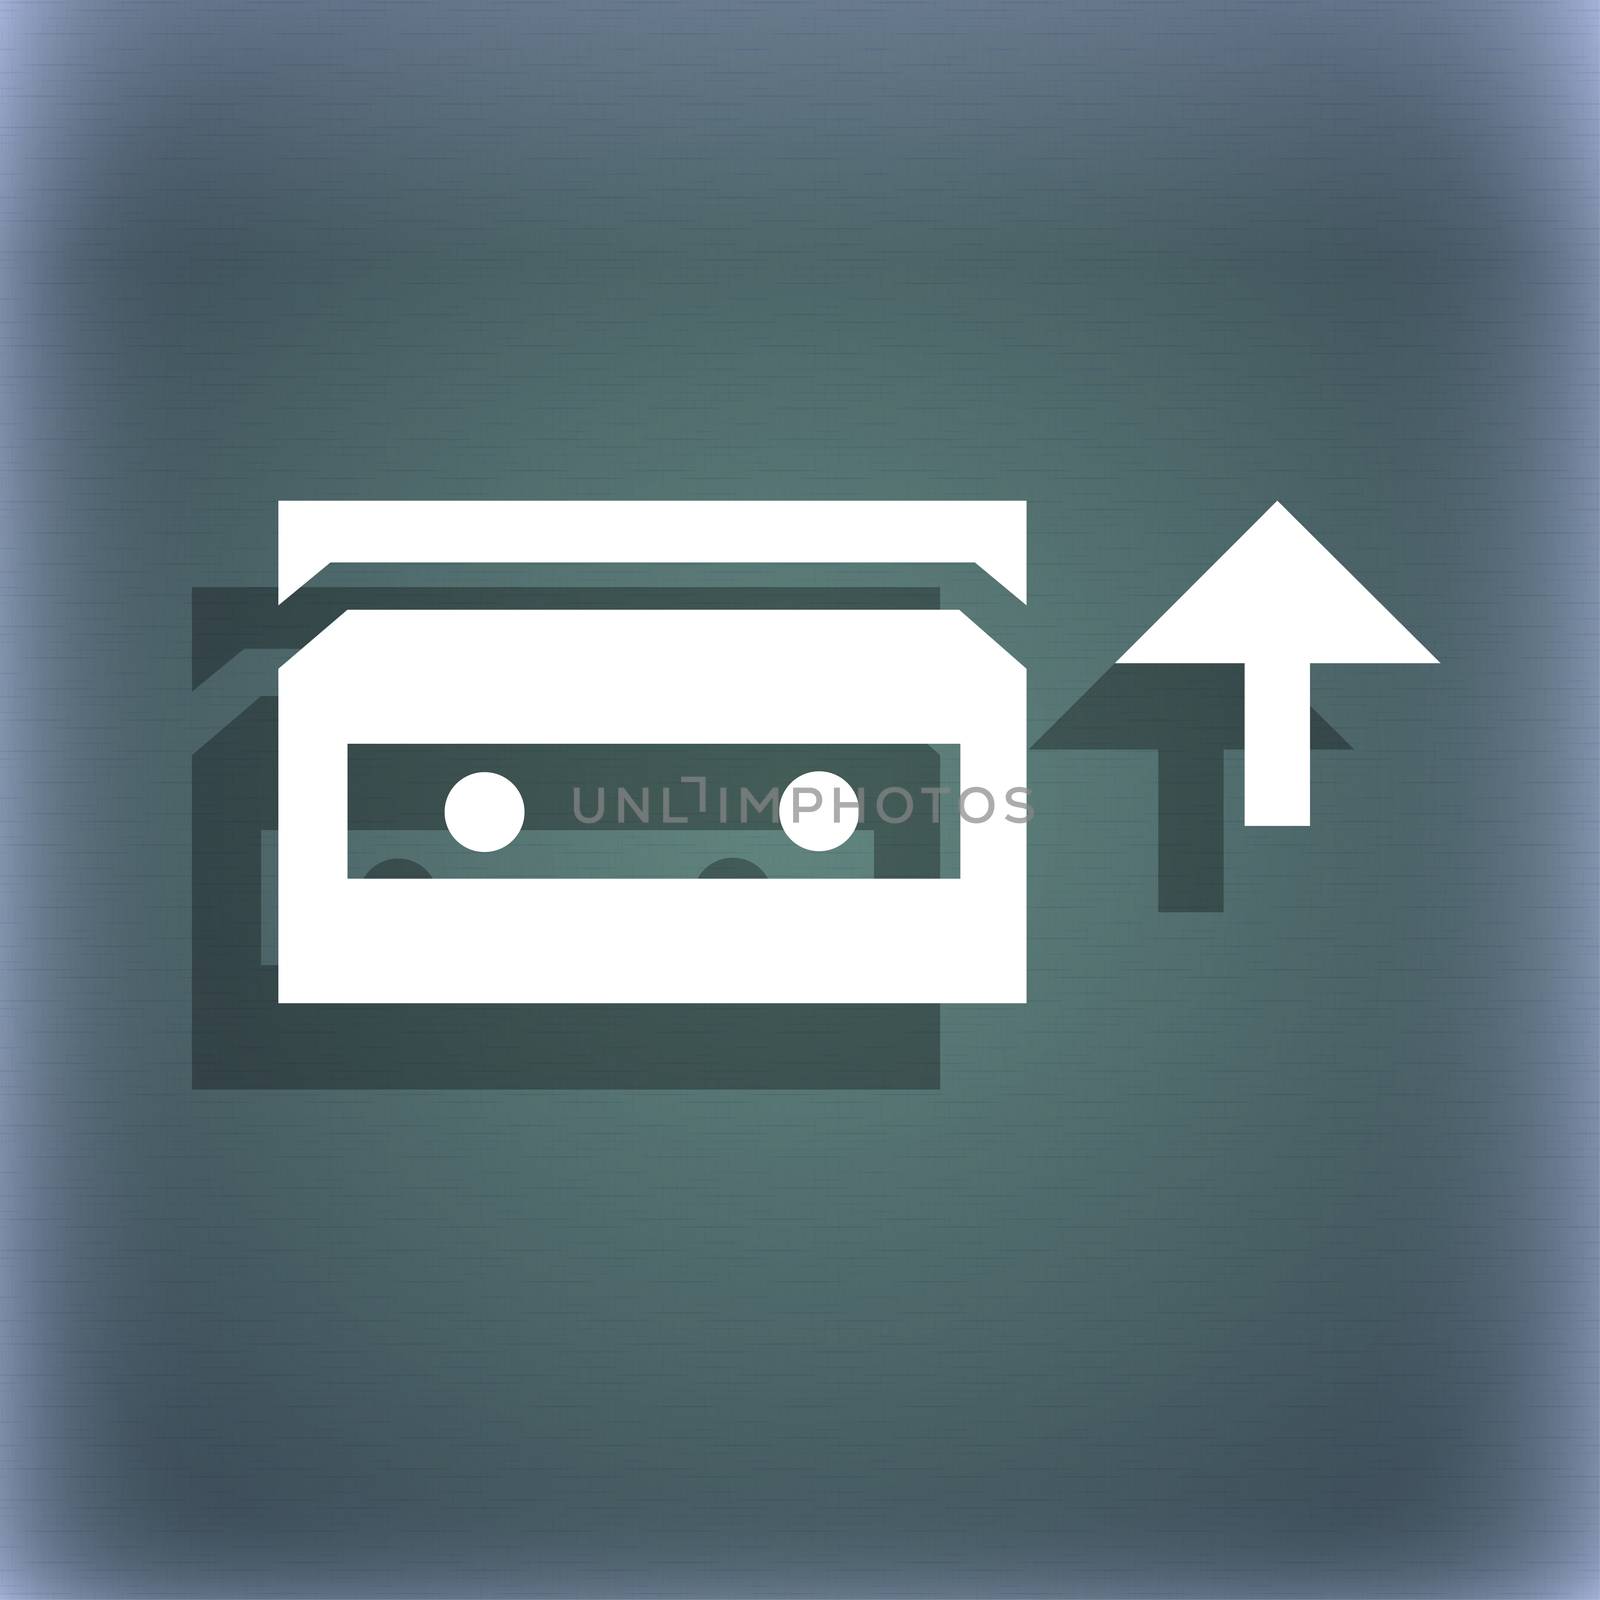 audio cassette icon symbol on the blue-green abstract background with shadow and space for your text. illustration